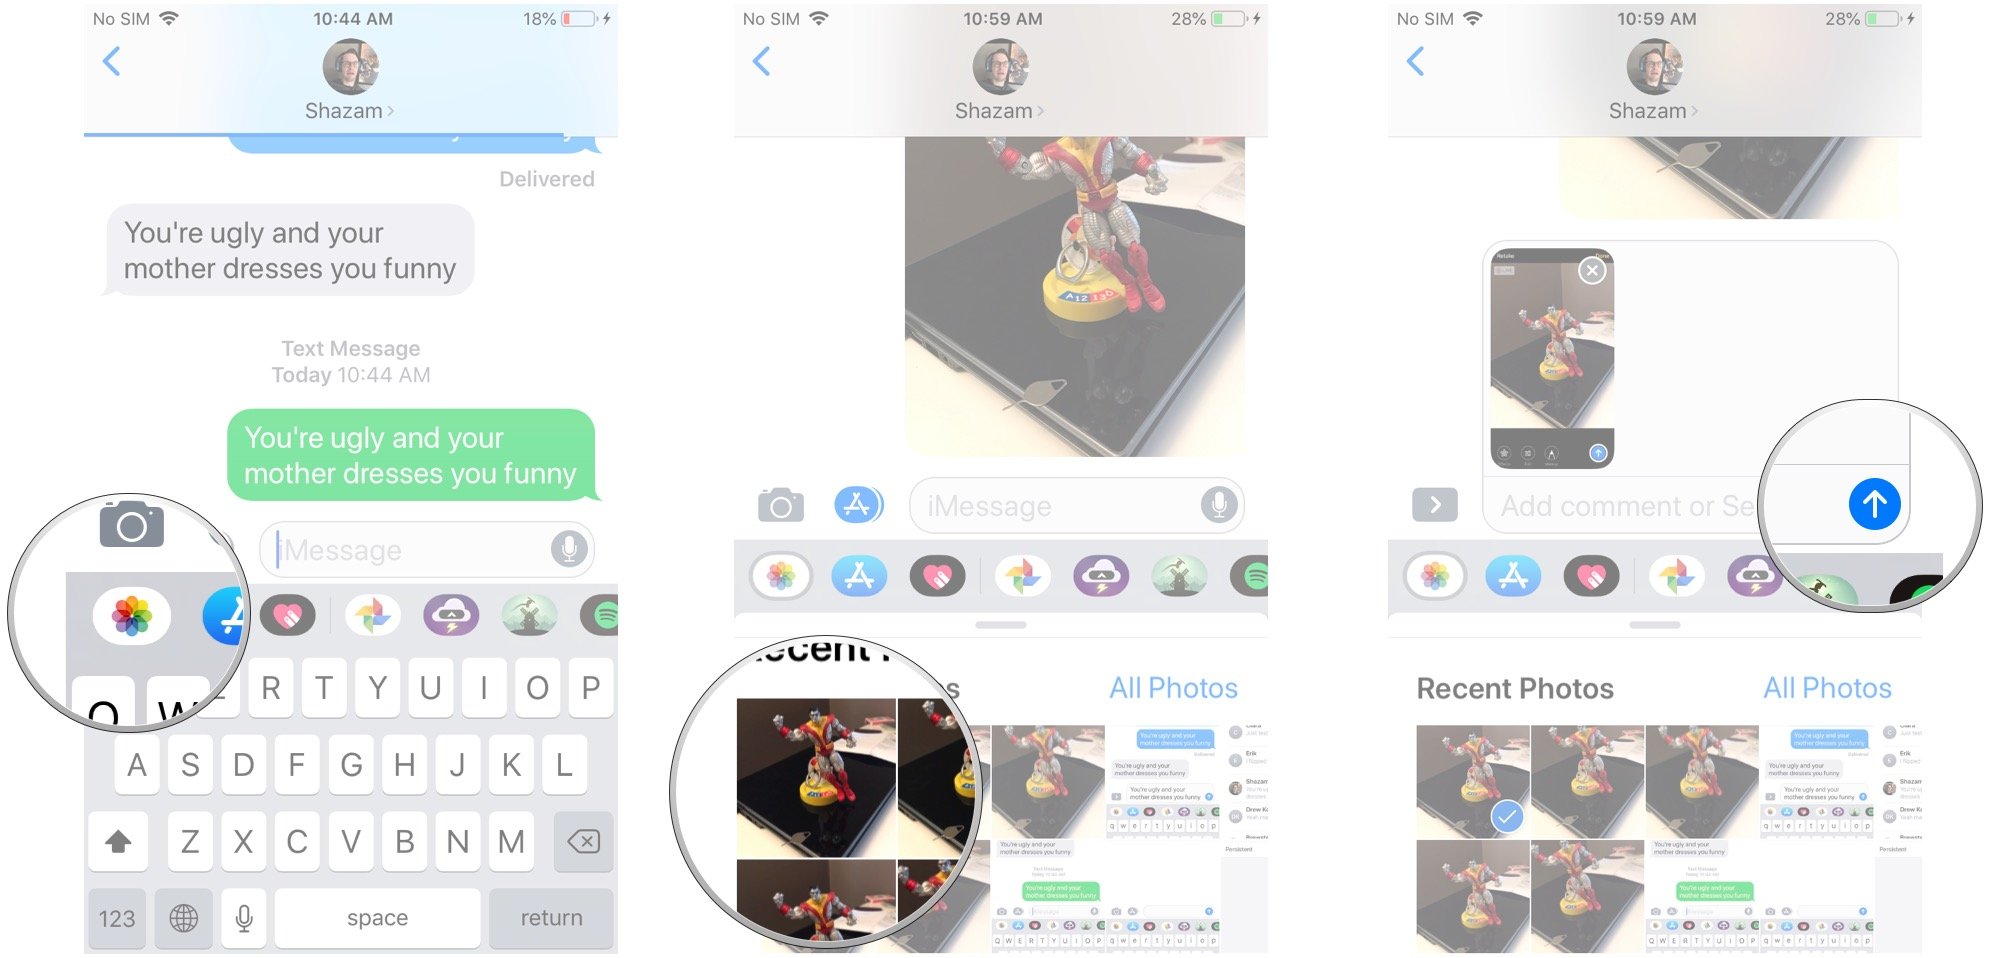 Send existing photo, showing how to tap the Photos app button, then tap a photo or video, then tap Send